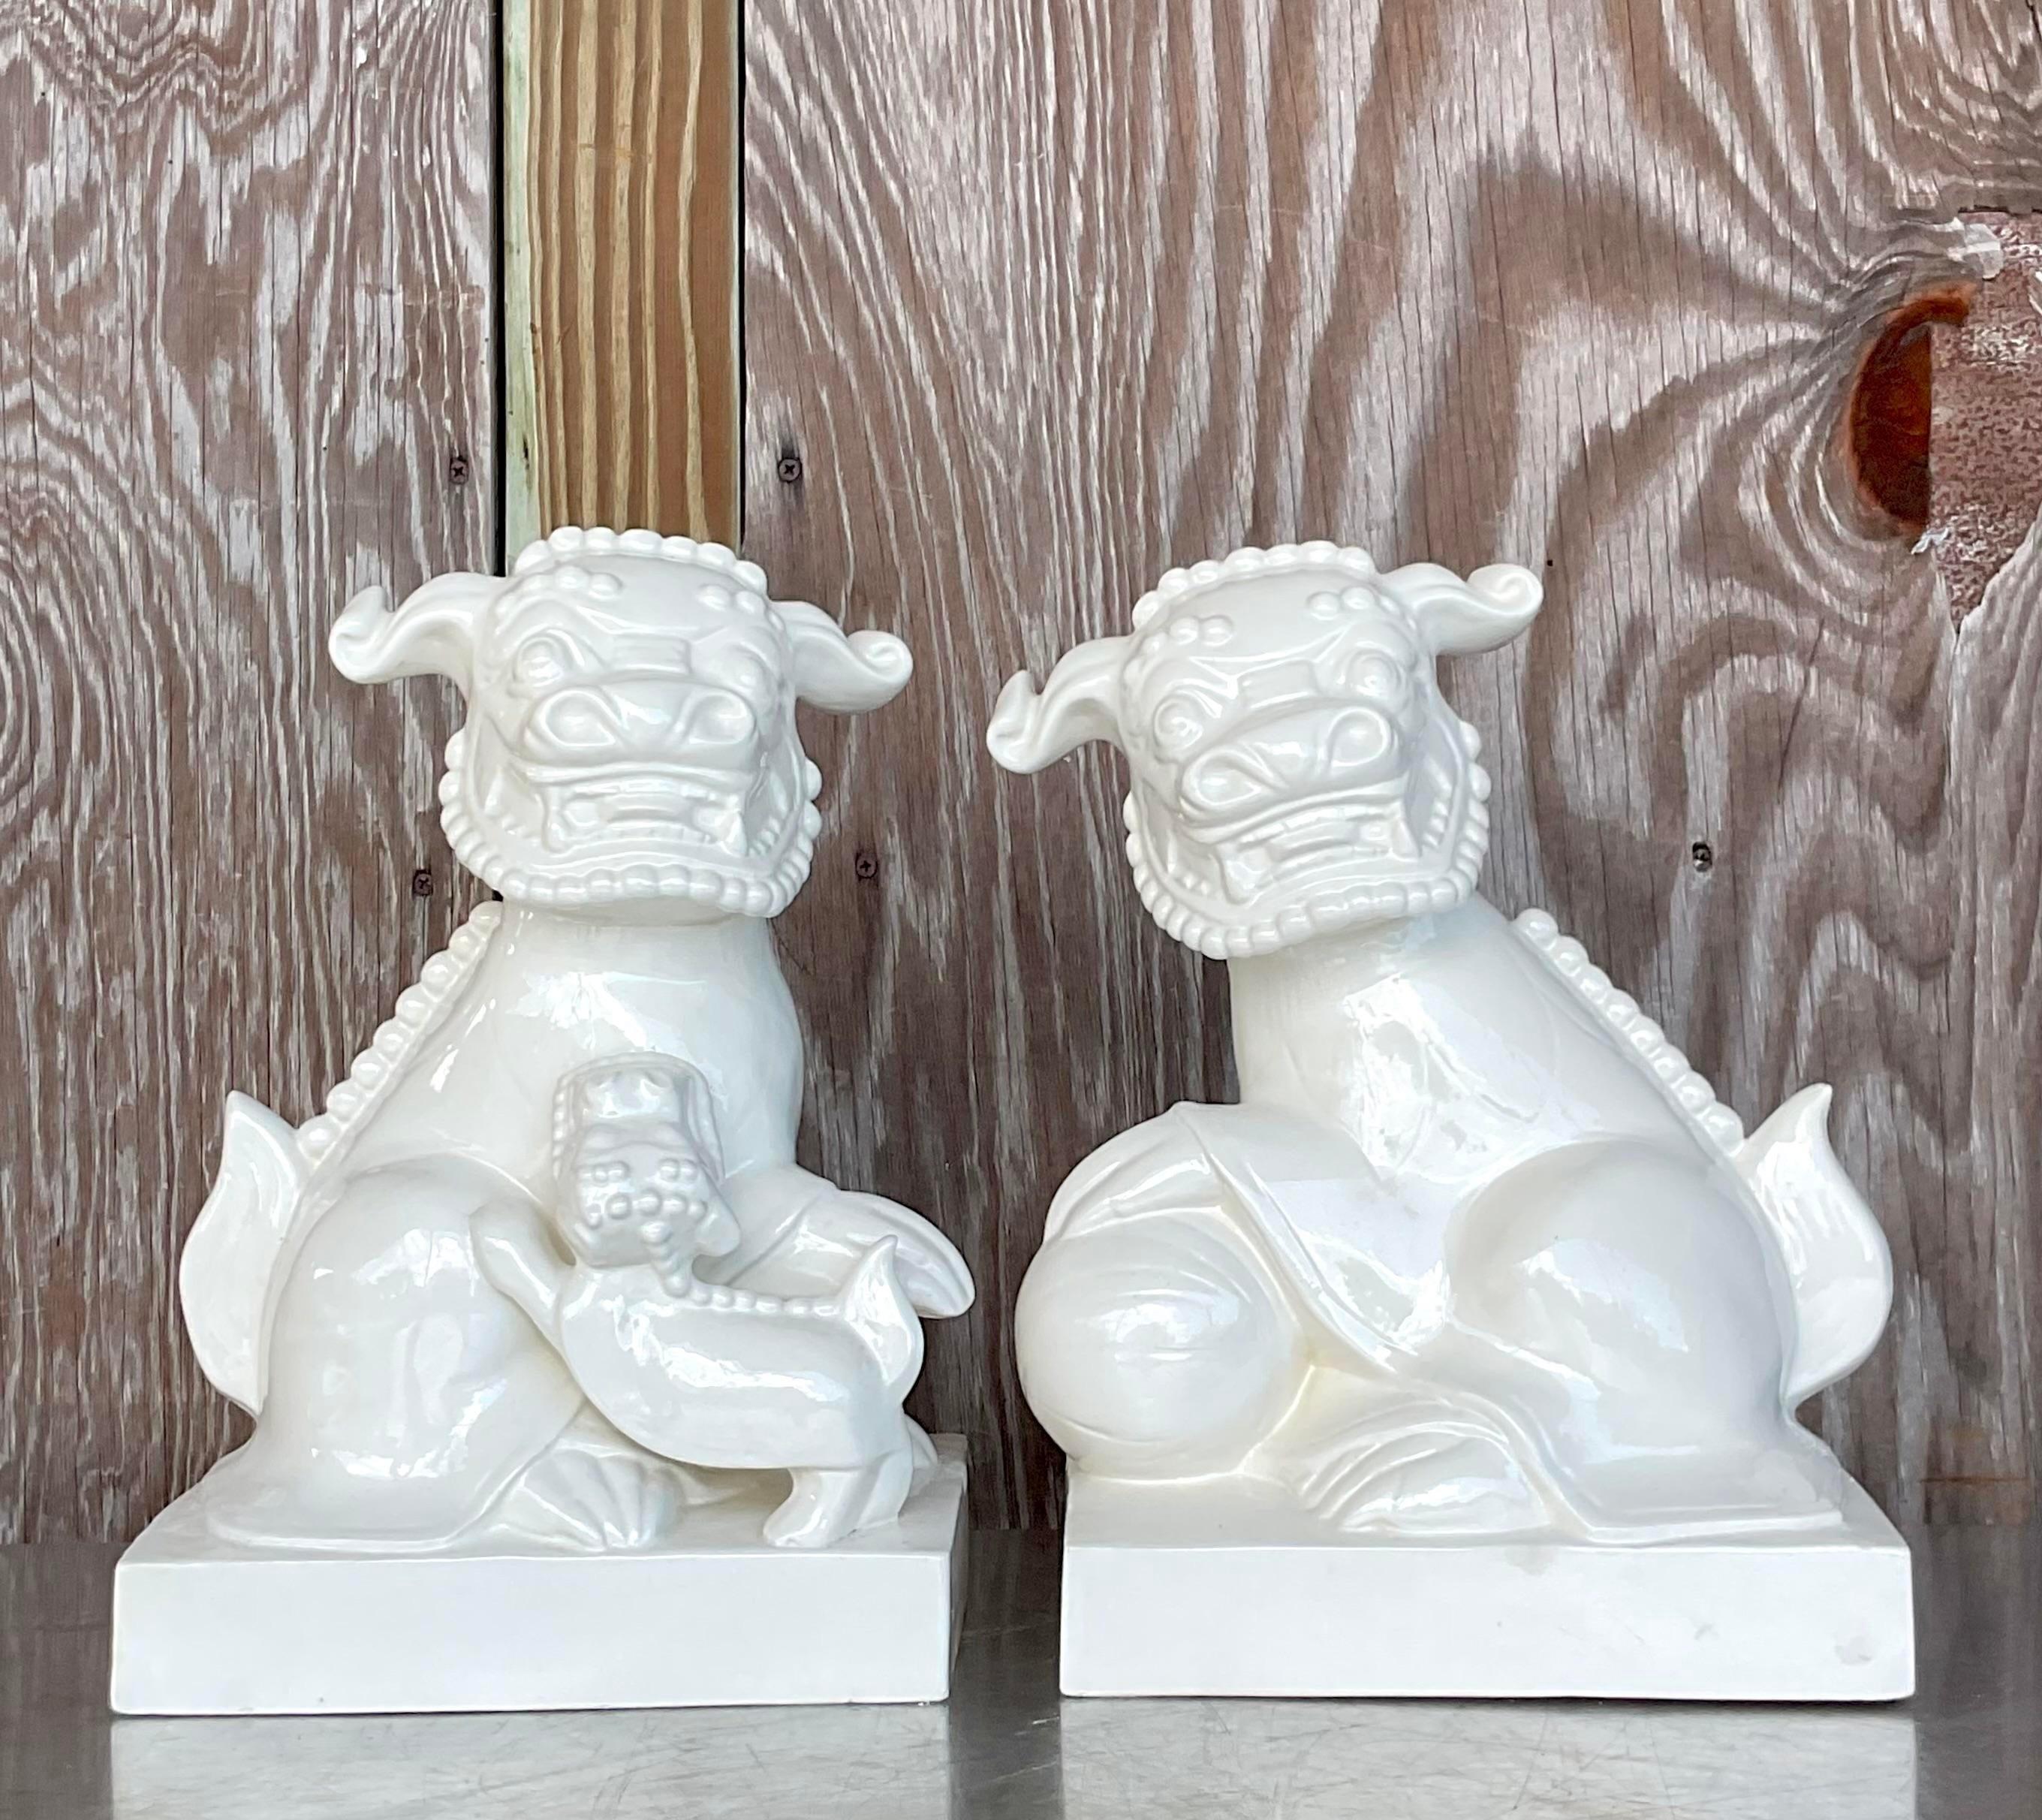 Late 20th Century Vintage Asian Glazed Ceramic Foo Dogs - a Pair For Sale 2